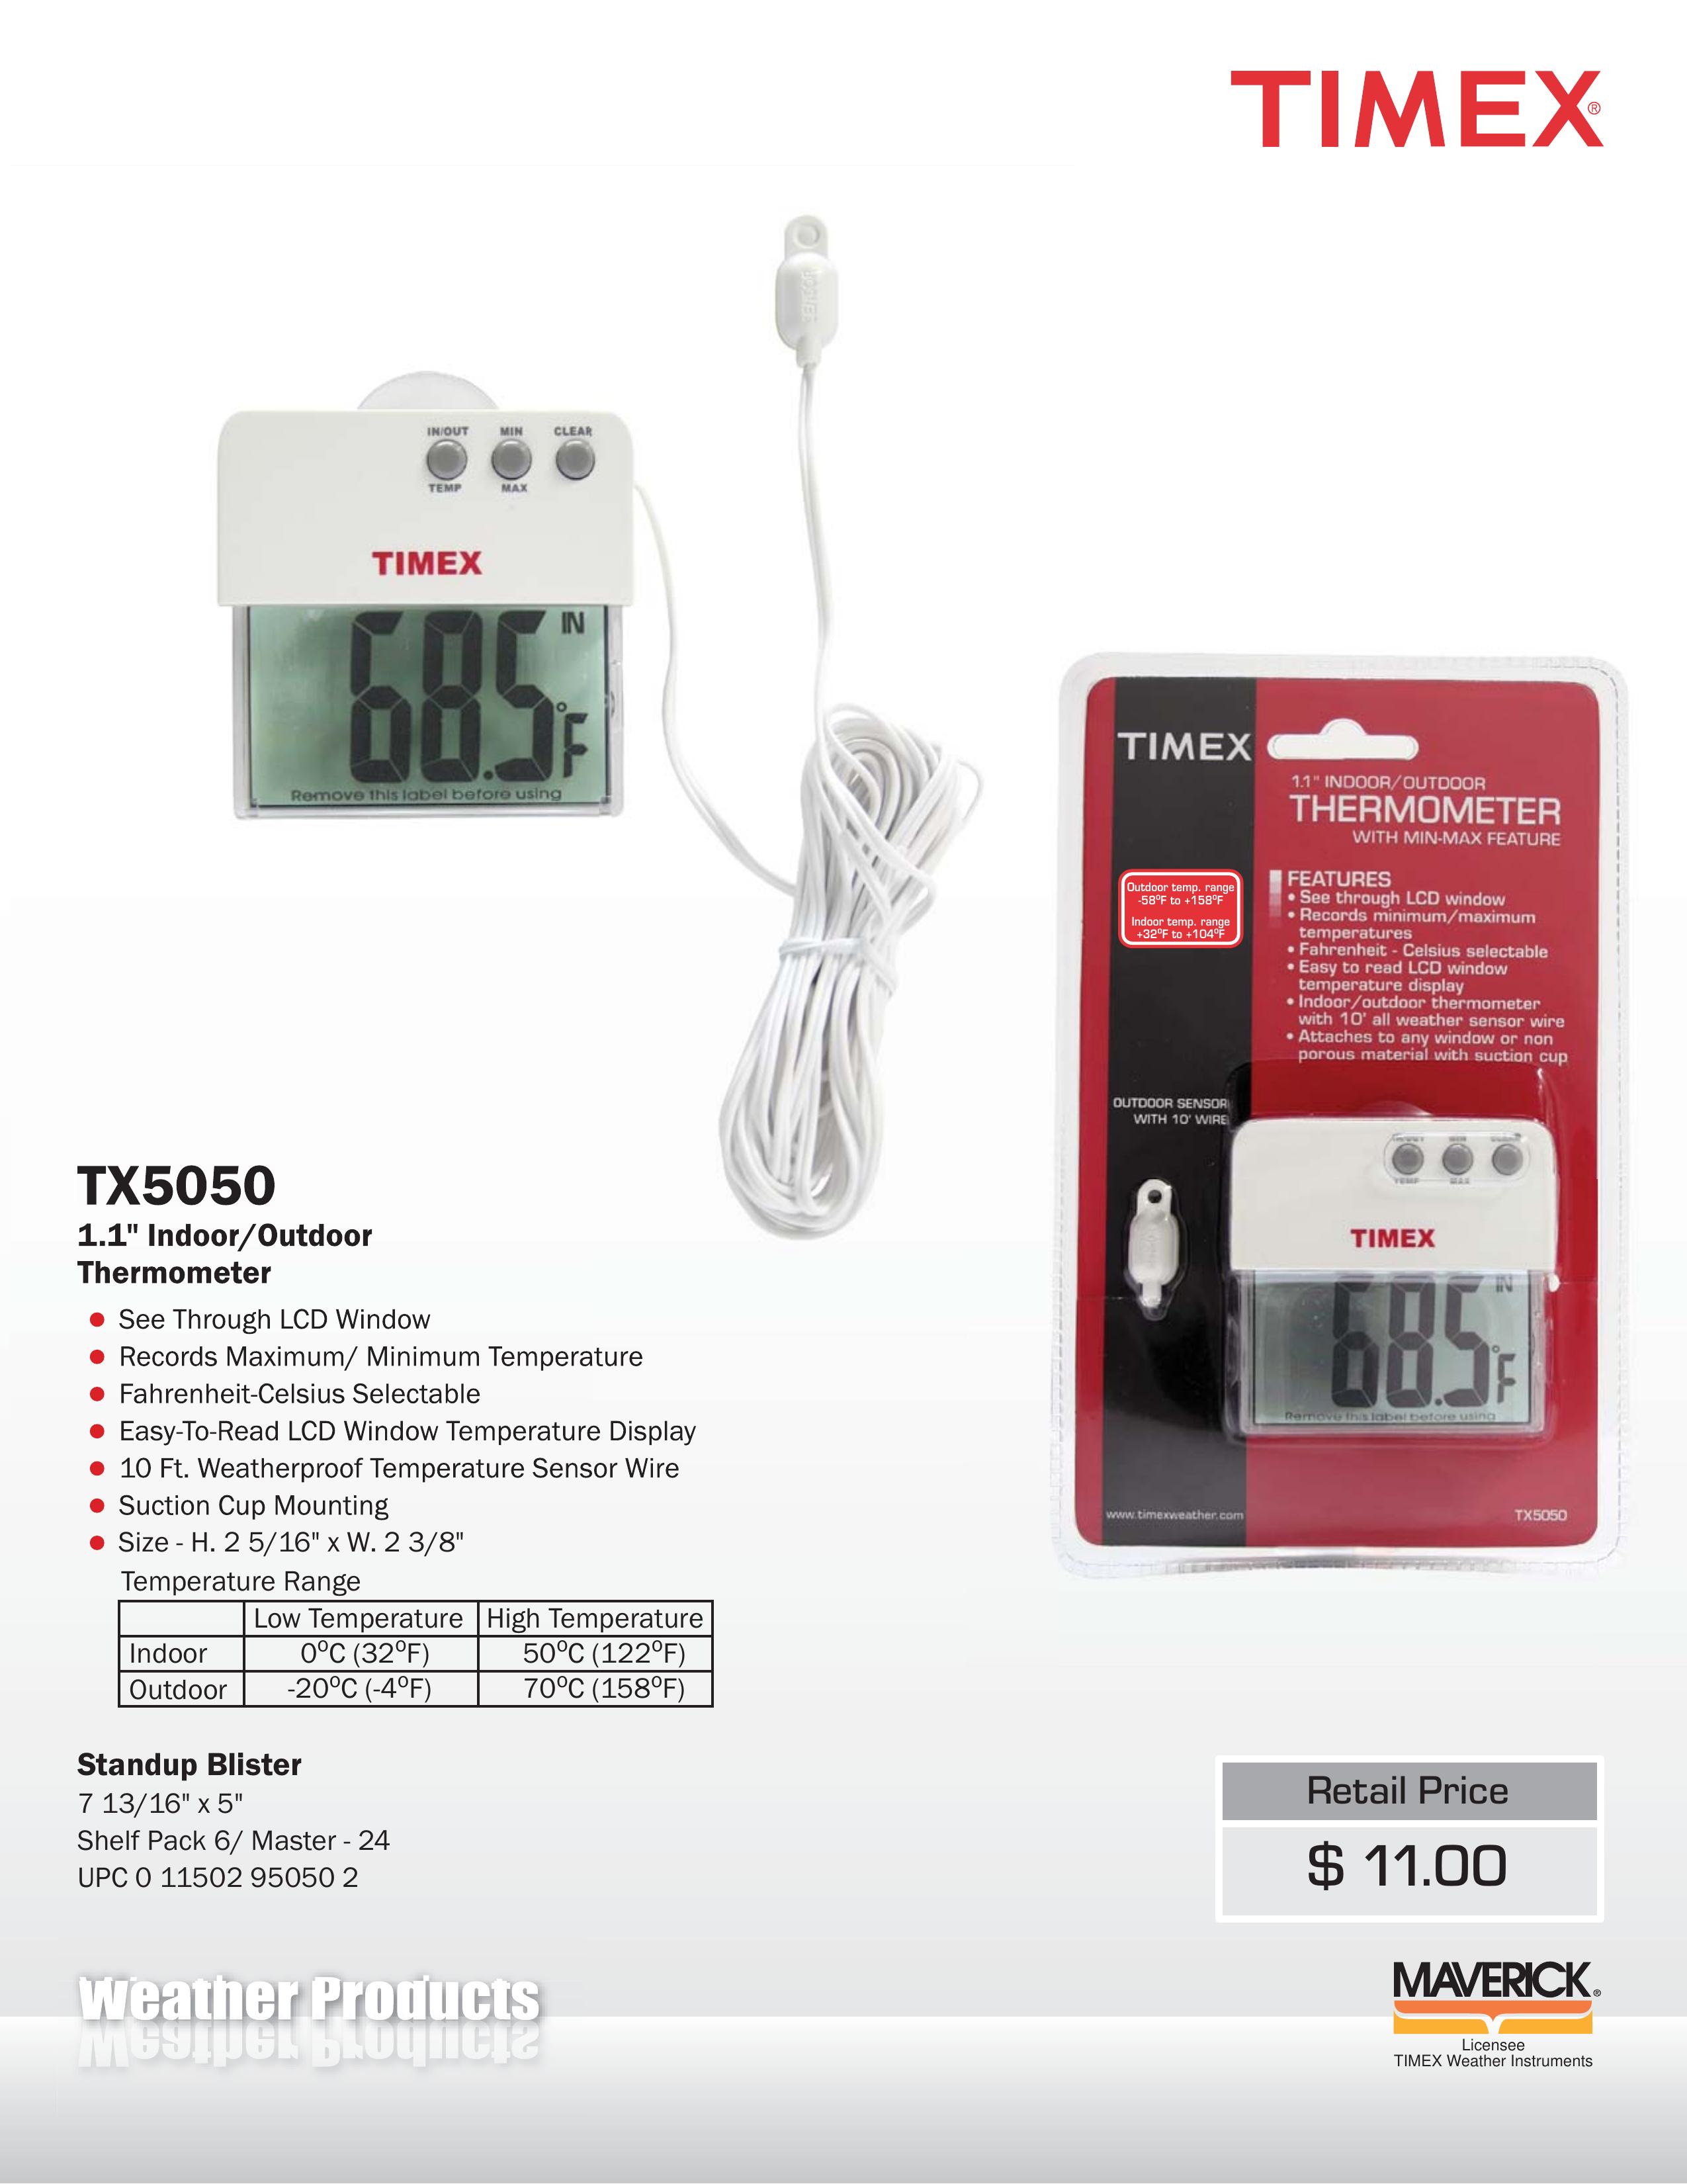 TIMEX Weather Products TX5050 Thermometer User Manual